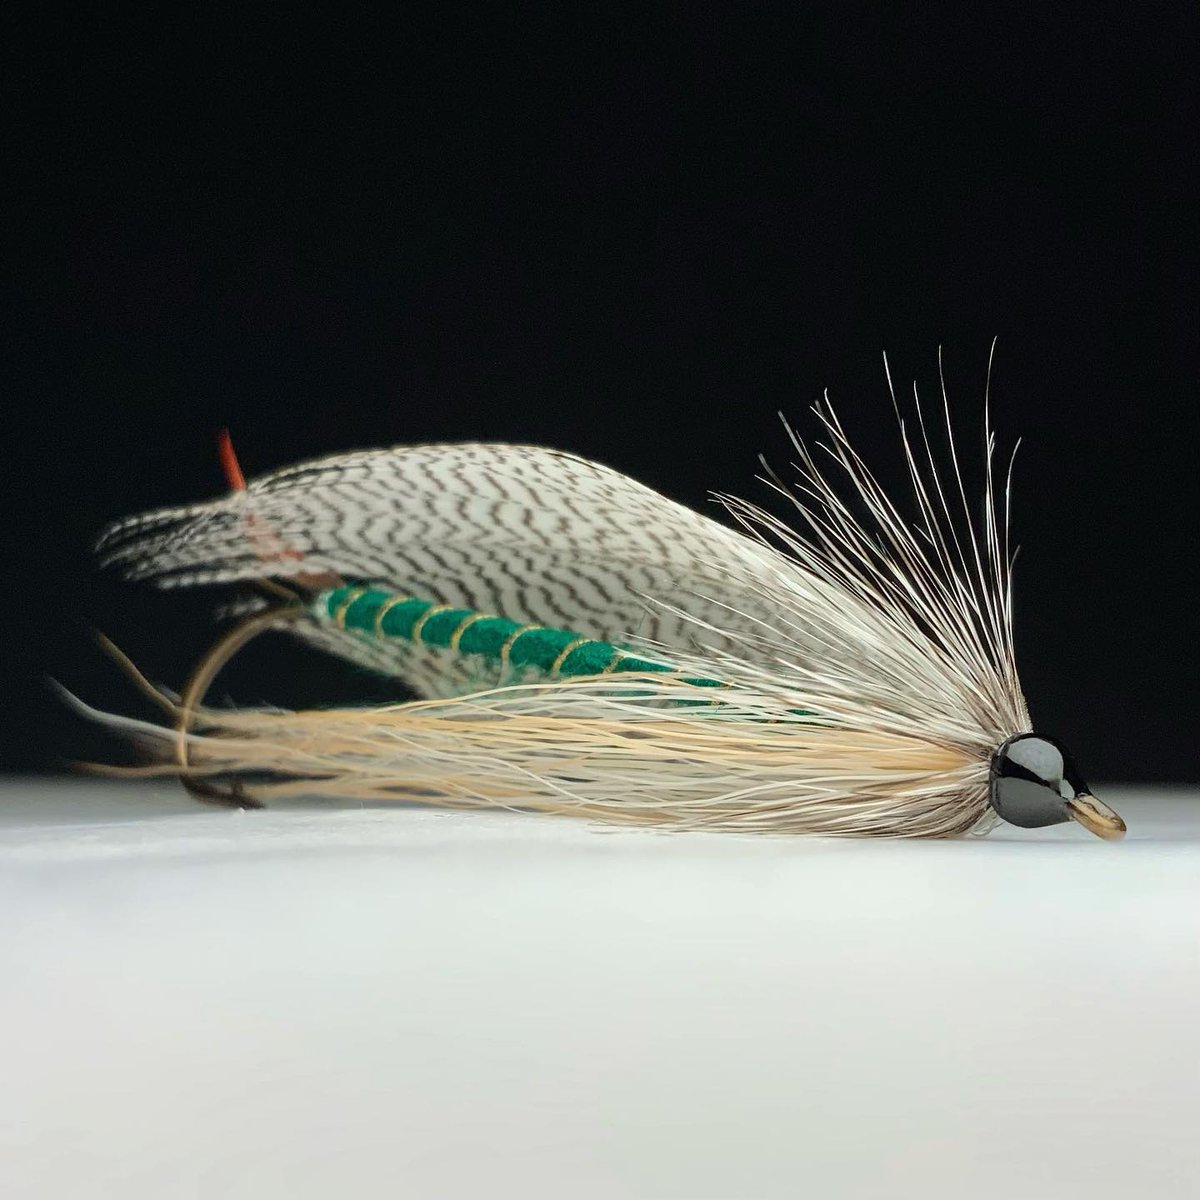 'Flatwing streamer' // tie and image by Fred Klein @grizzlykingfly . . . . #flytying #flytyingjunkie #flyfishing #flyfishingaddict #flyfish #flytyingnation #jstockard #fishing #atthevise #flytyingaddict #flytyingporn